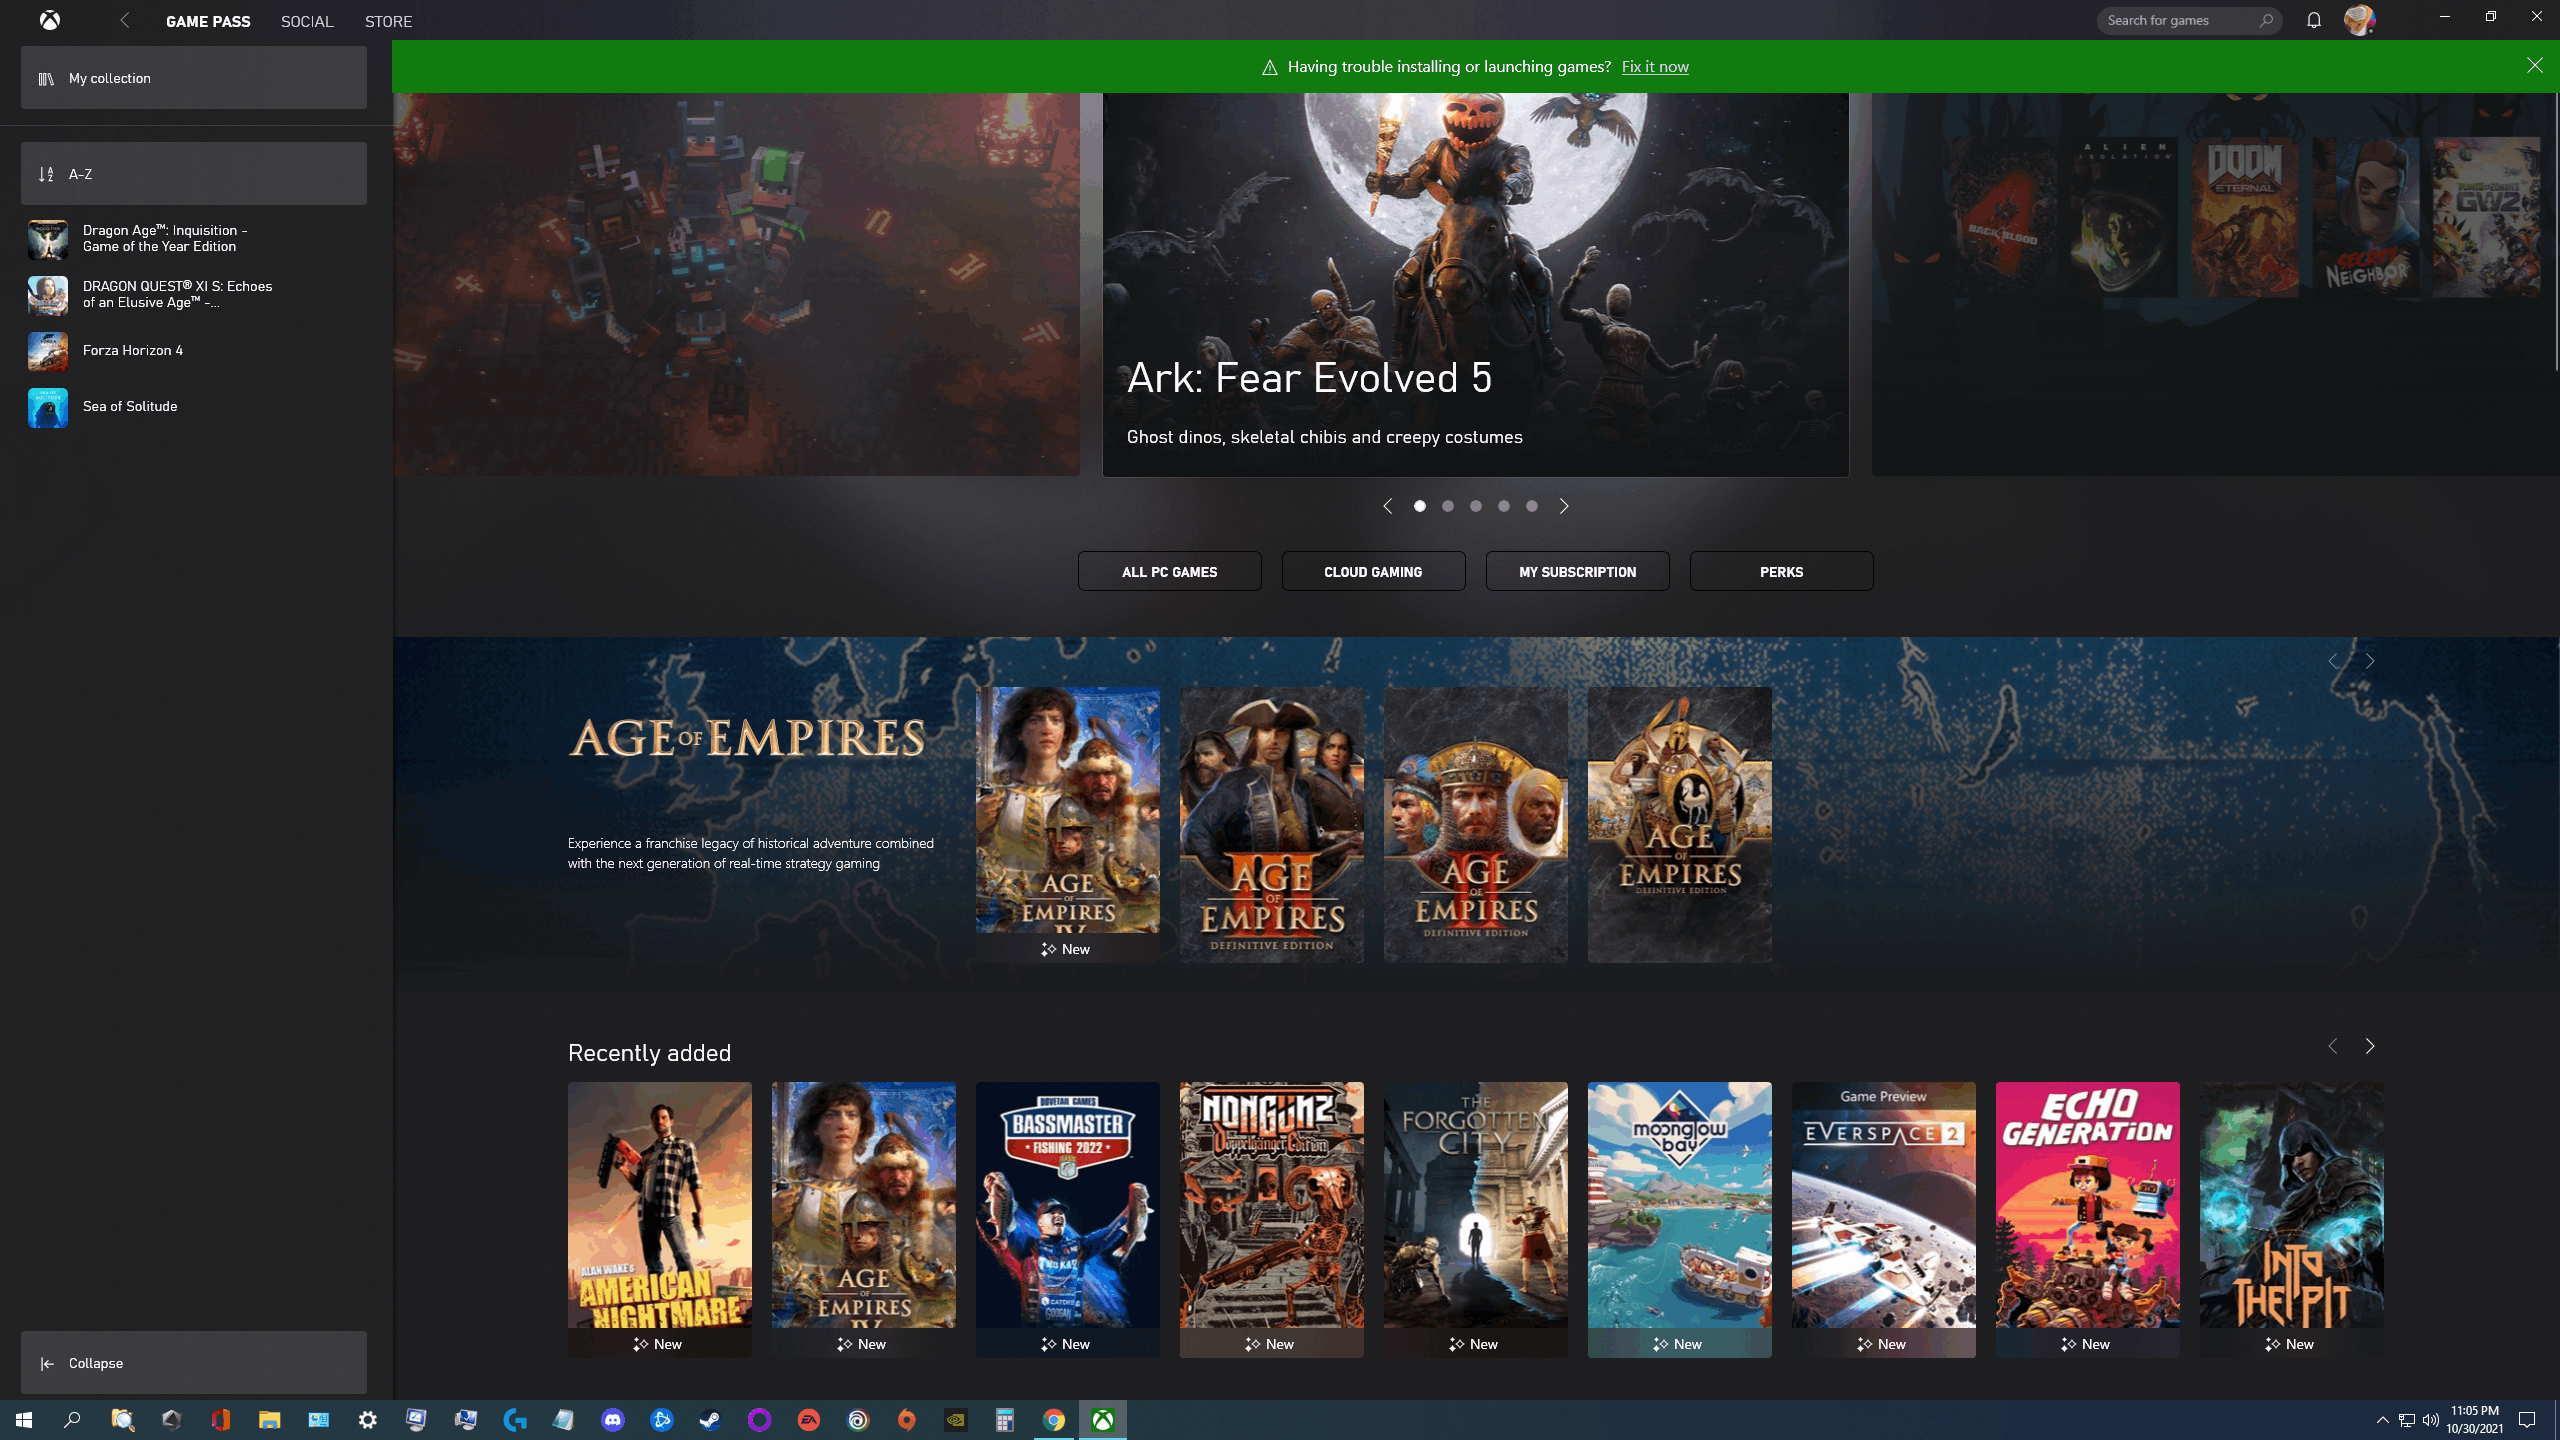 Gangster Destructief breedte Xbox App on PC looping to "gaming services" - Microsoft Community